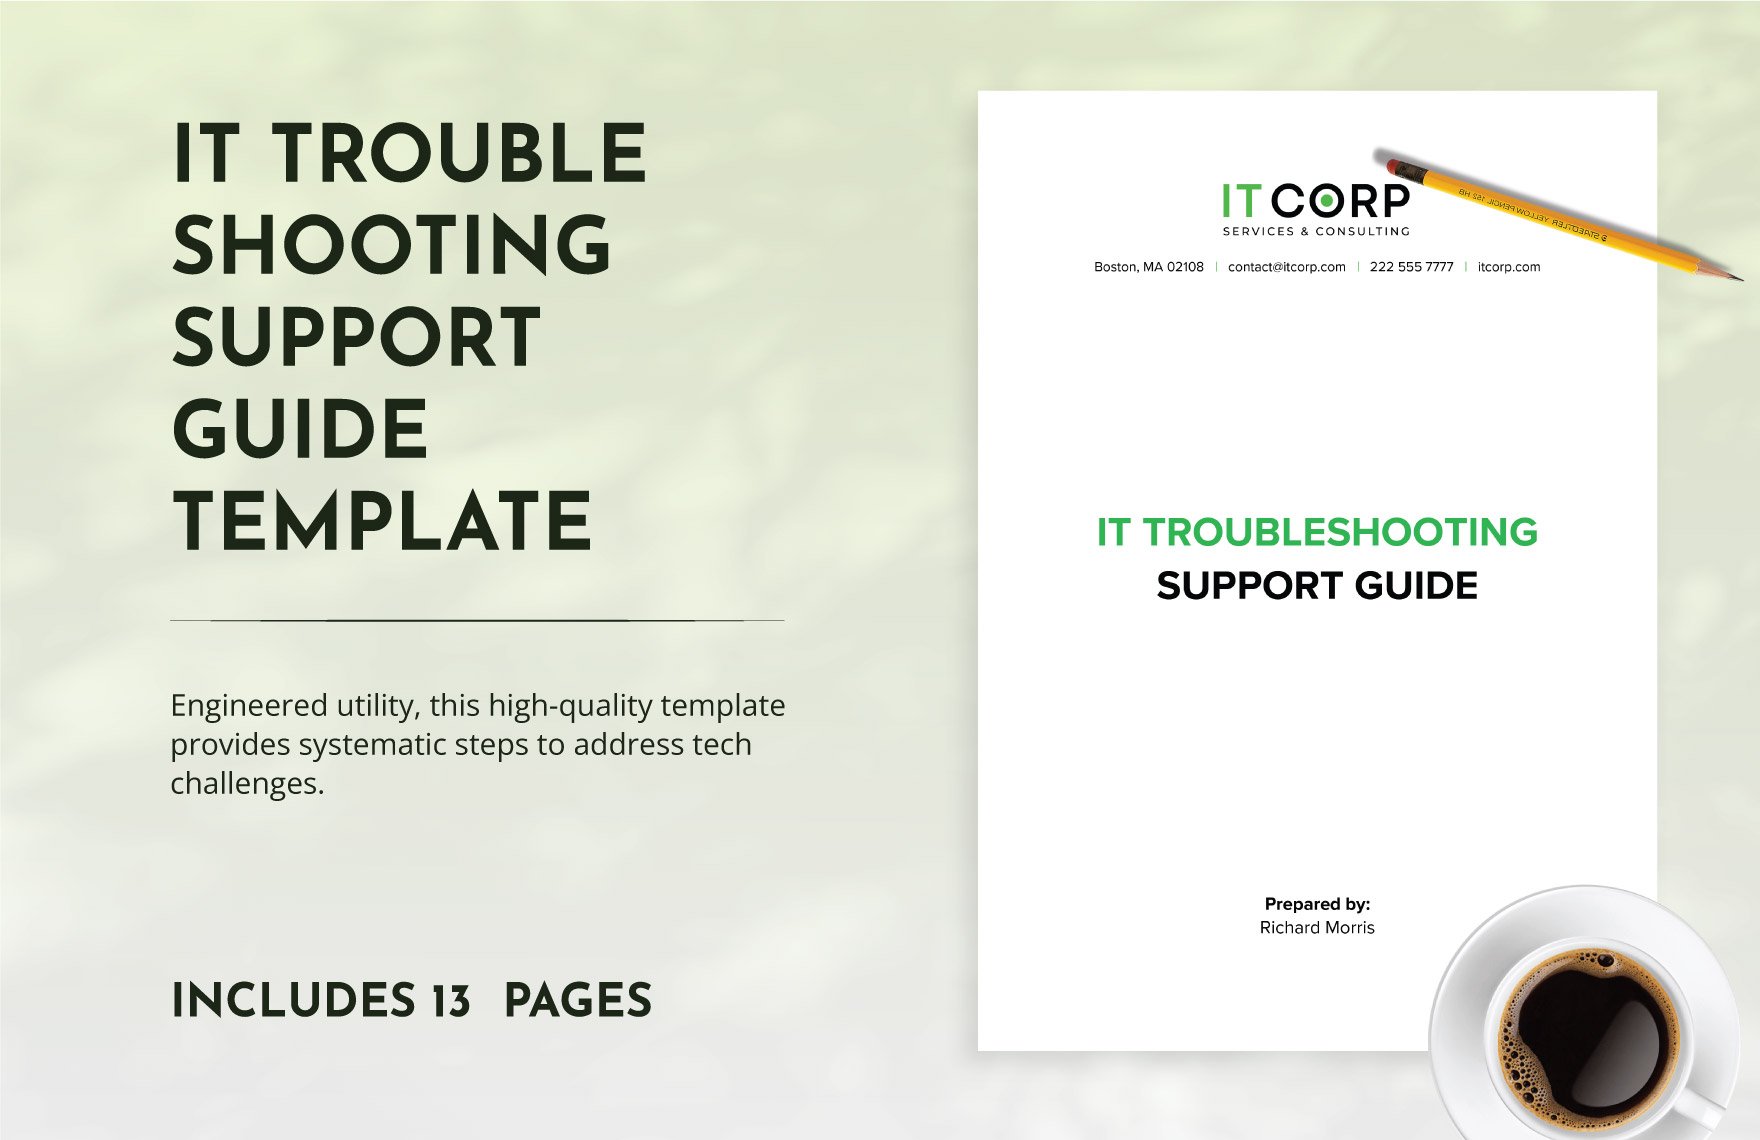 IT Troubleshooting Support Guide Template